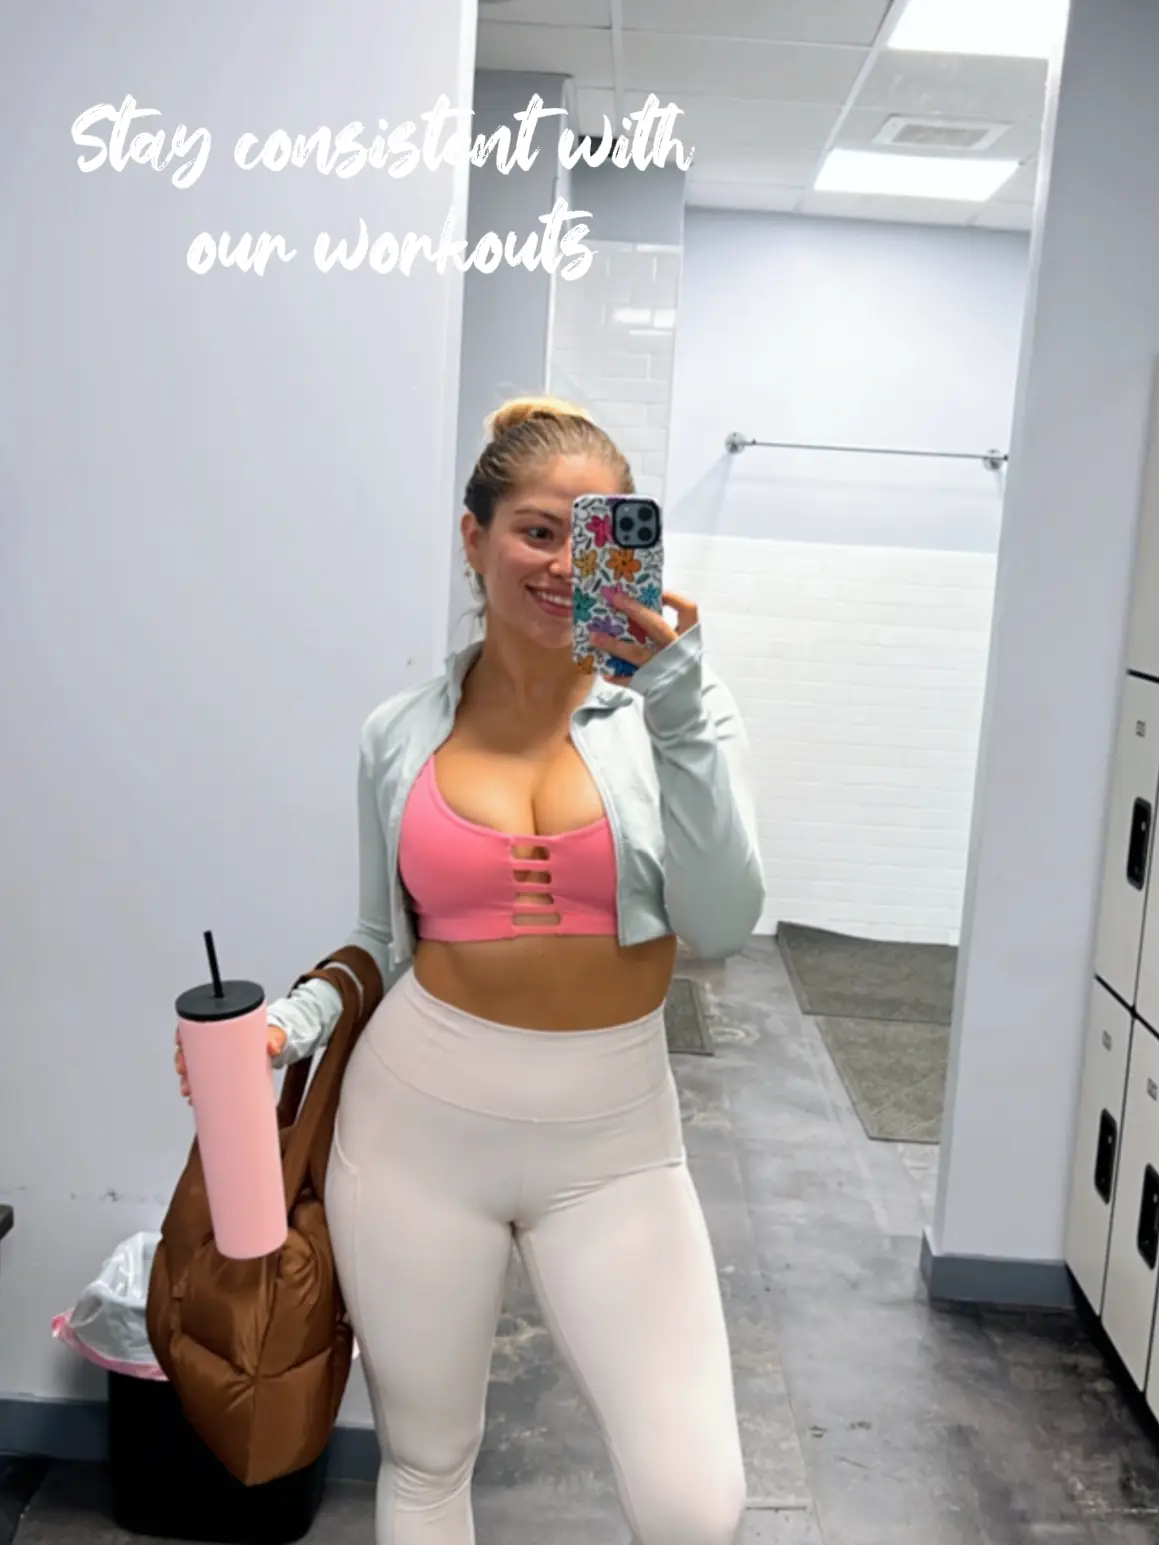 Loving the Pink Pilates Princess, Gallery posted by SoHerStyle